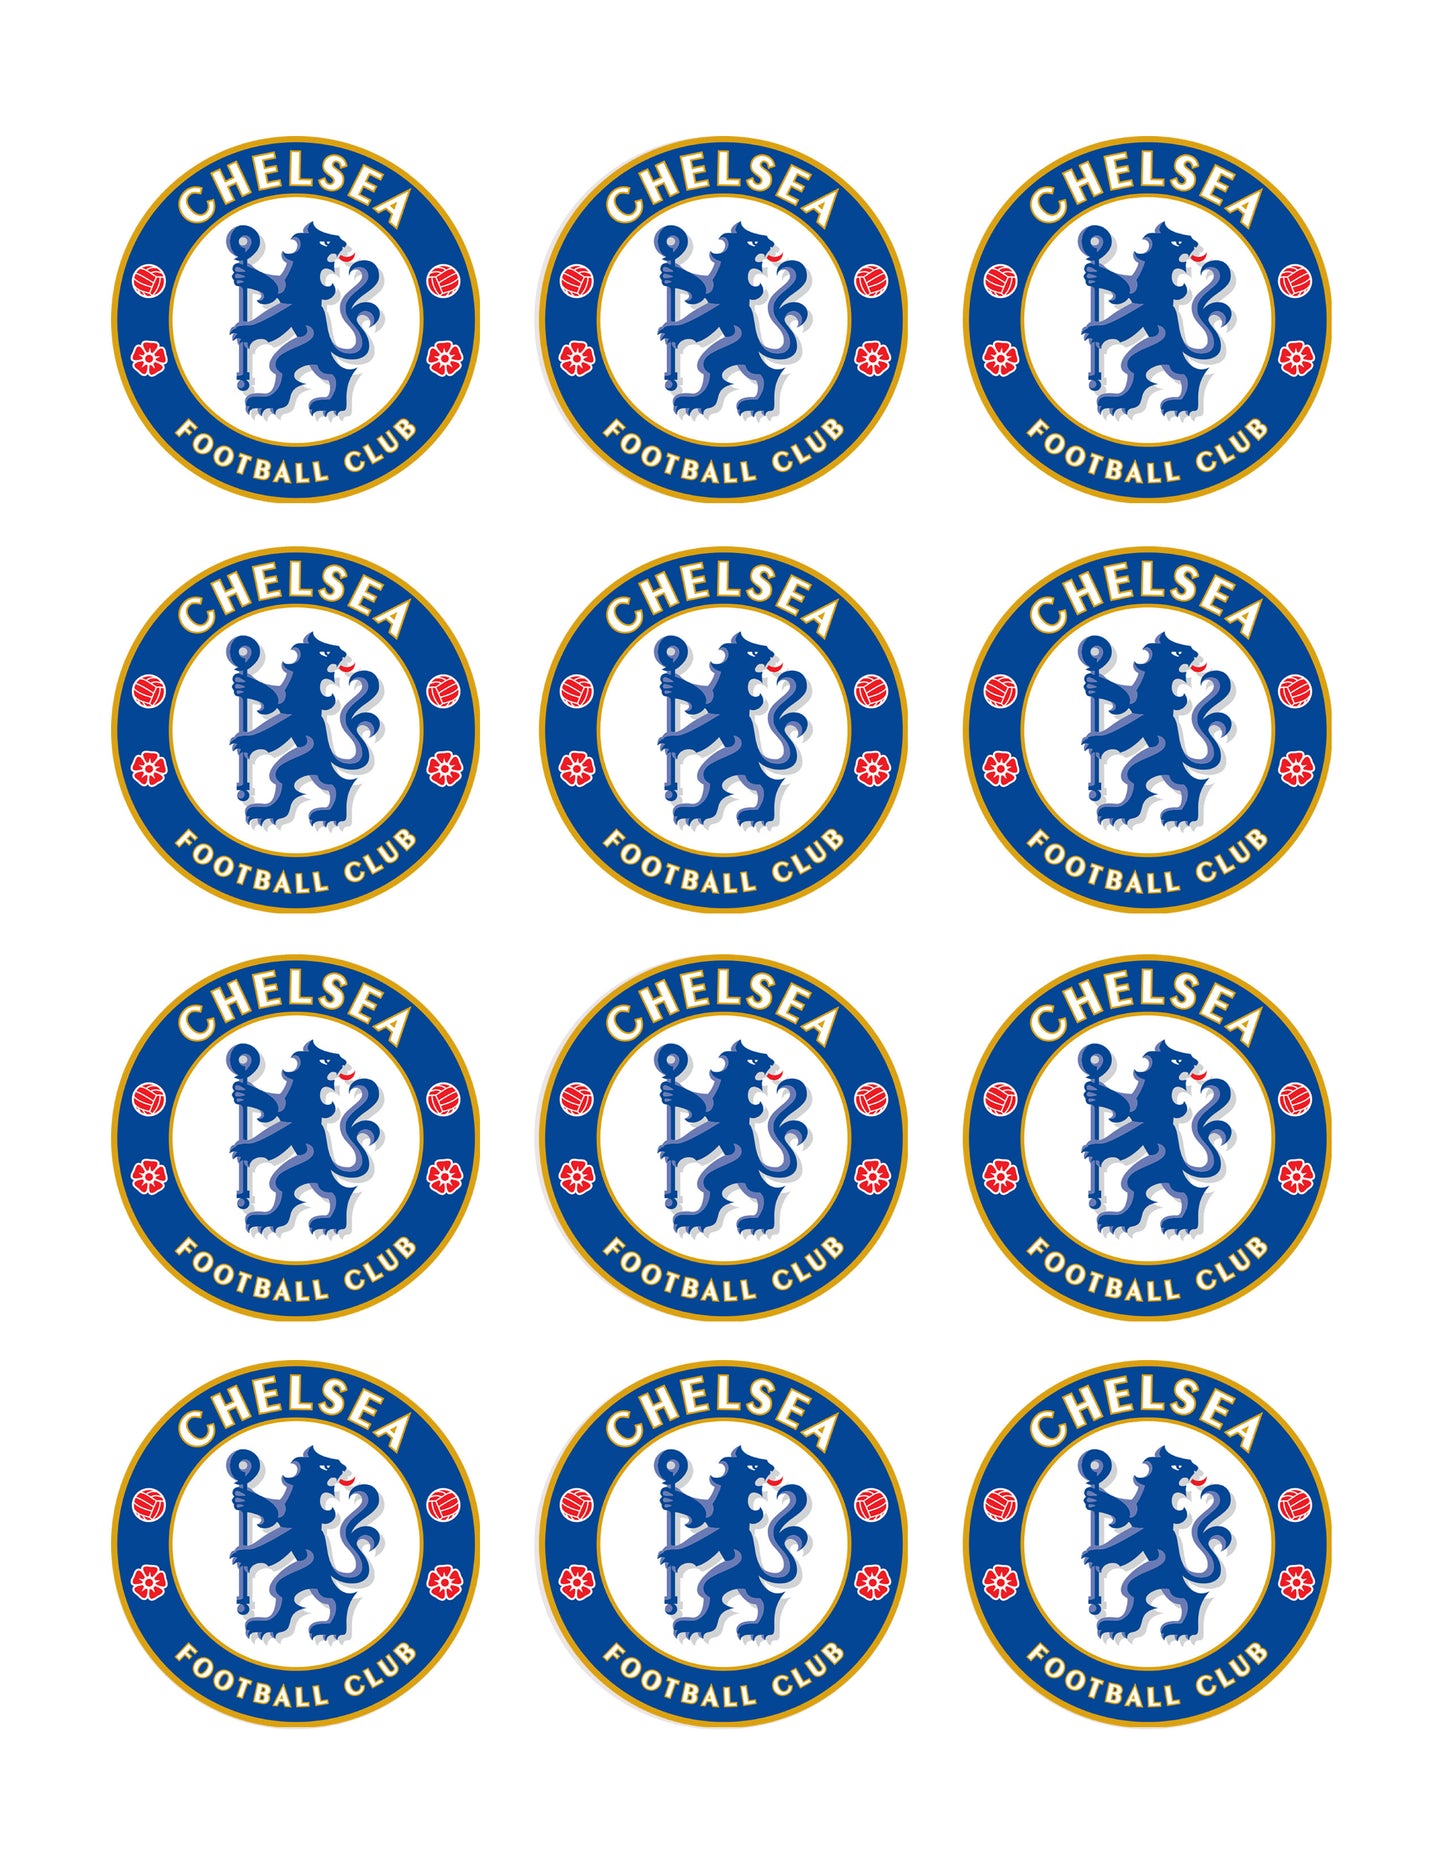 Chelsea Football Club - Edible Cake Topper, Cupcake Toppers, Strips